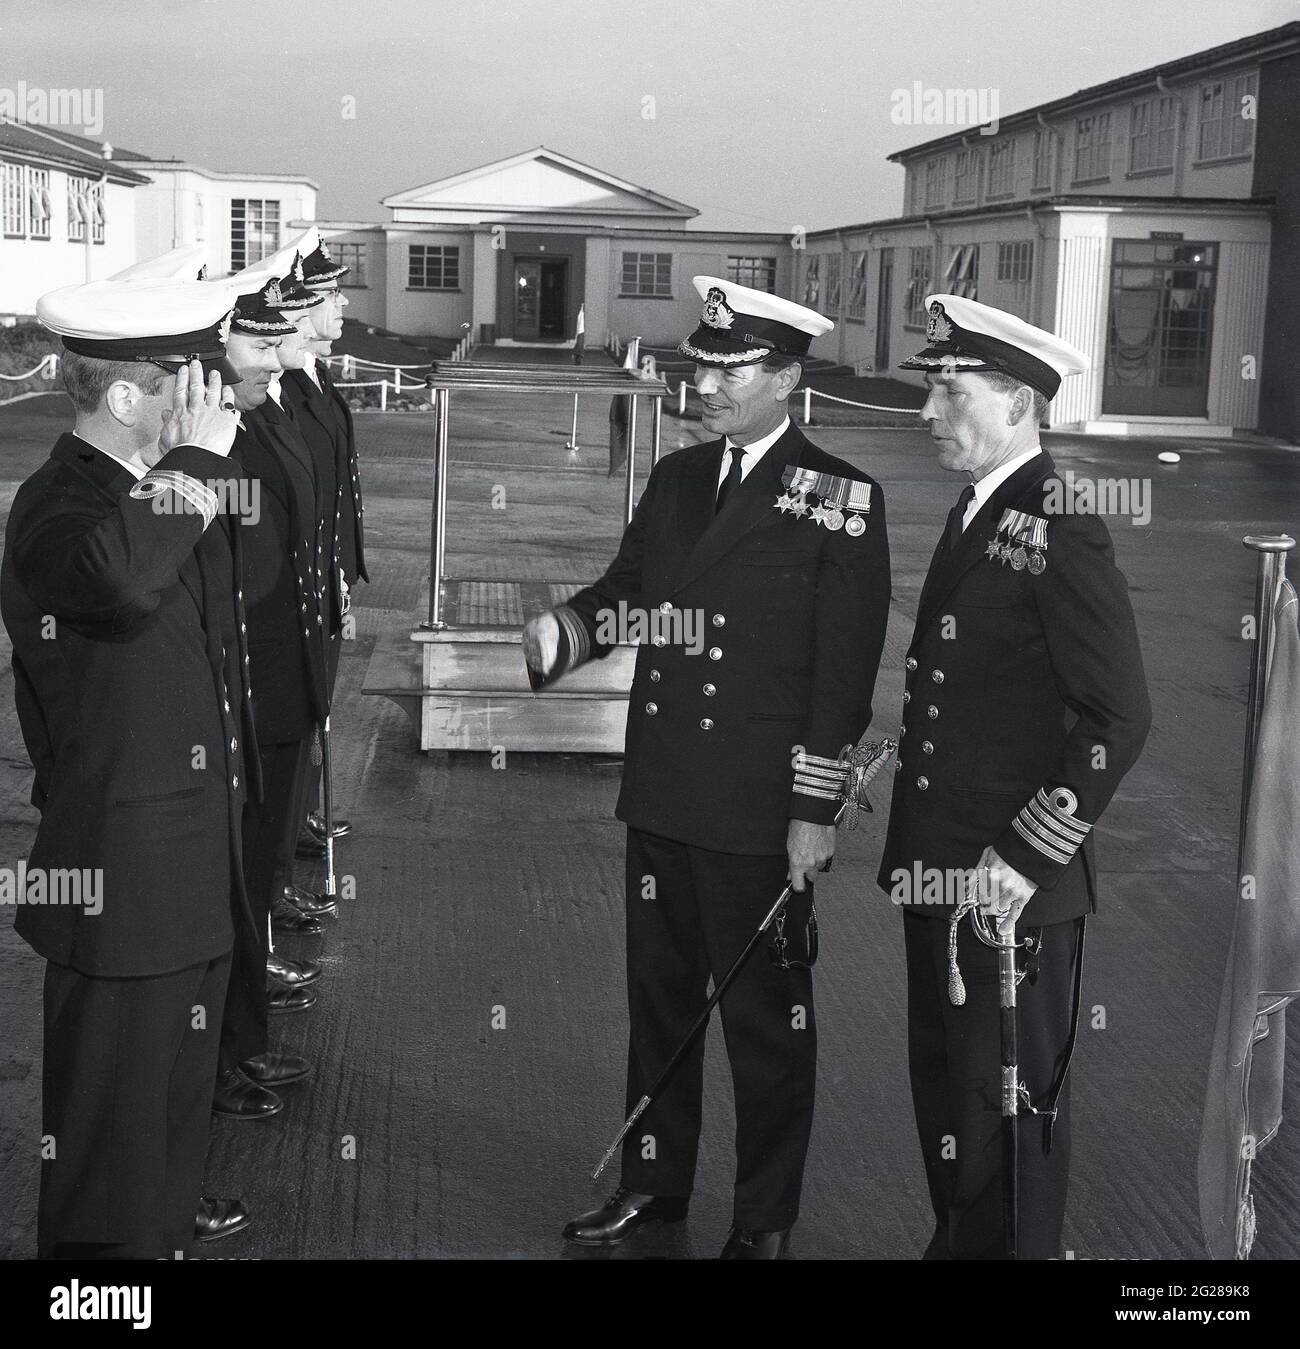 1960s, historical, outside at HMS Caledonia, in a hand-over of command, two Royal Naval Captains, one being introduced to a number of lower ranked officers, Fife, Scotland. Captain (Capt) is a senior officer rank of the Royal Navy, above a Commander and below Commodore and has a NATO ranking code of OF-5. The rank is equivalent to a Colonel in the British Army and Royal Marines, and to a Group Captain in the Royal Air Force. HMS Caledonia was first opened in 1937 and was responsible for artificer apprentice training up to 1985, with many thousands of young men going through training. Stock Photo